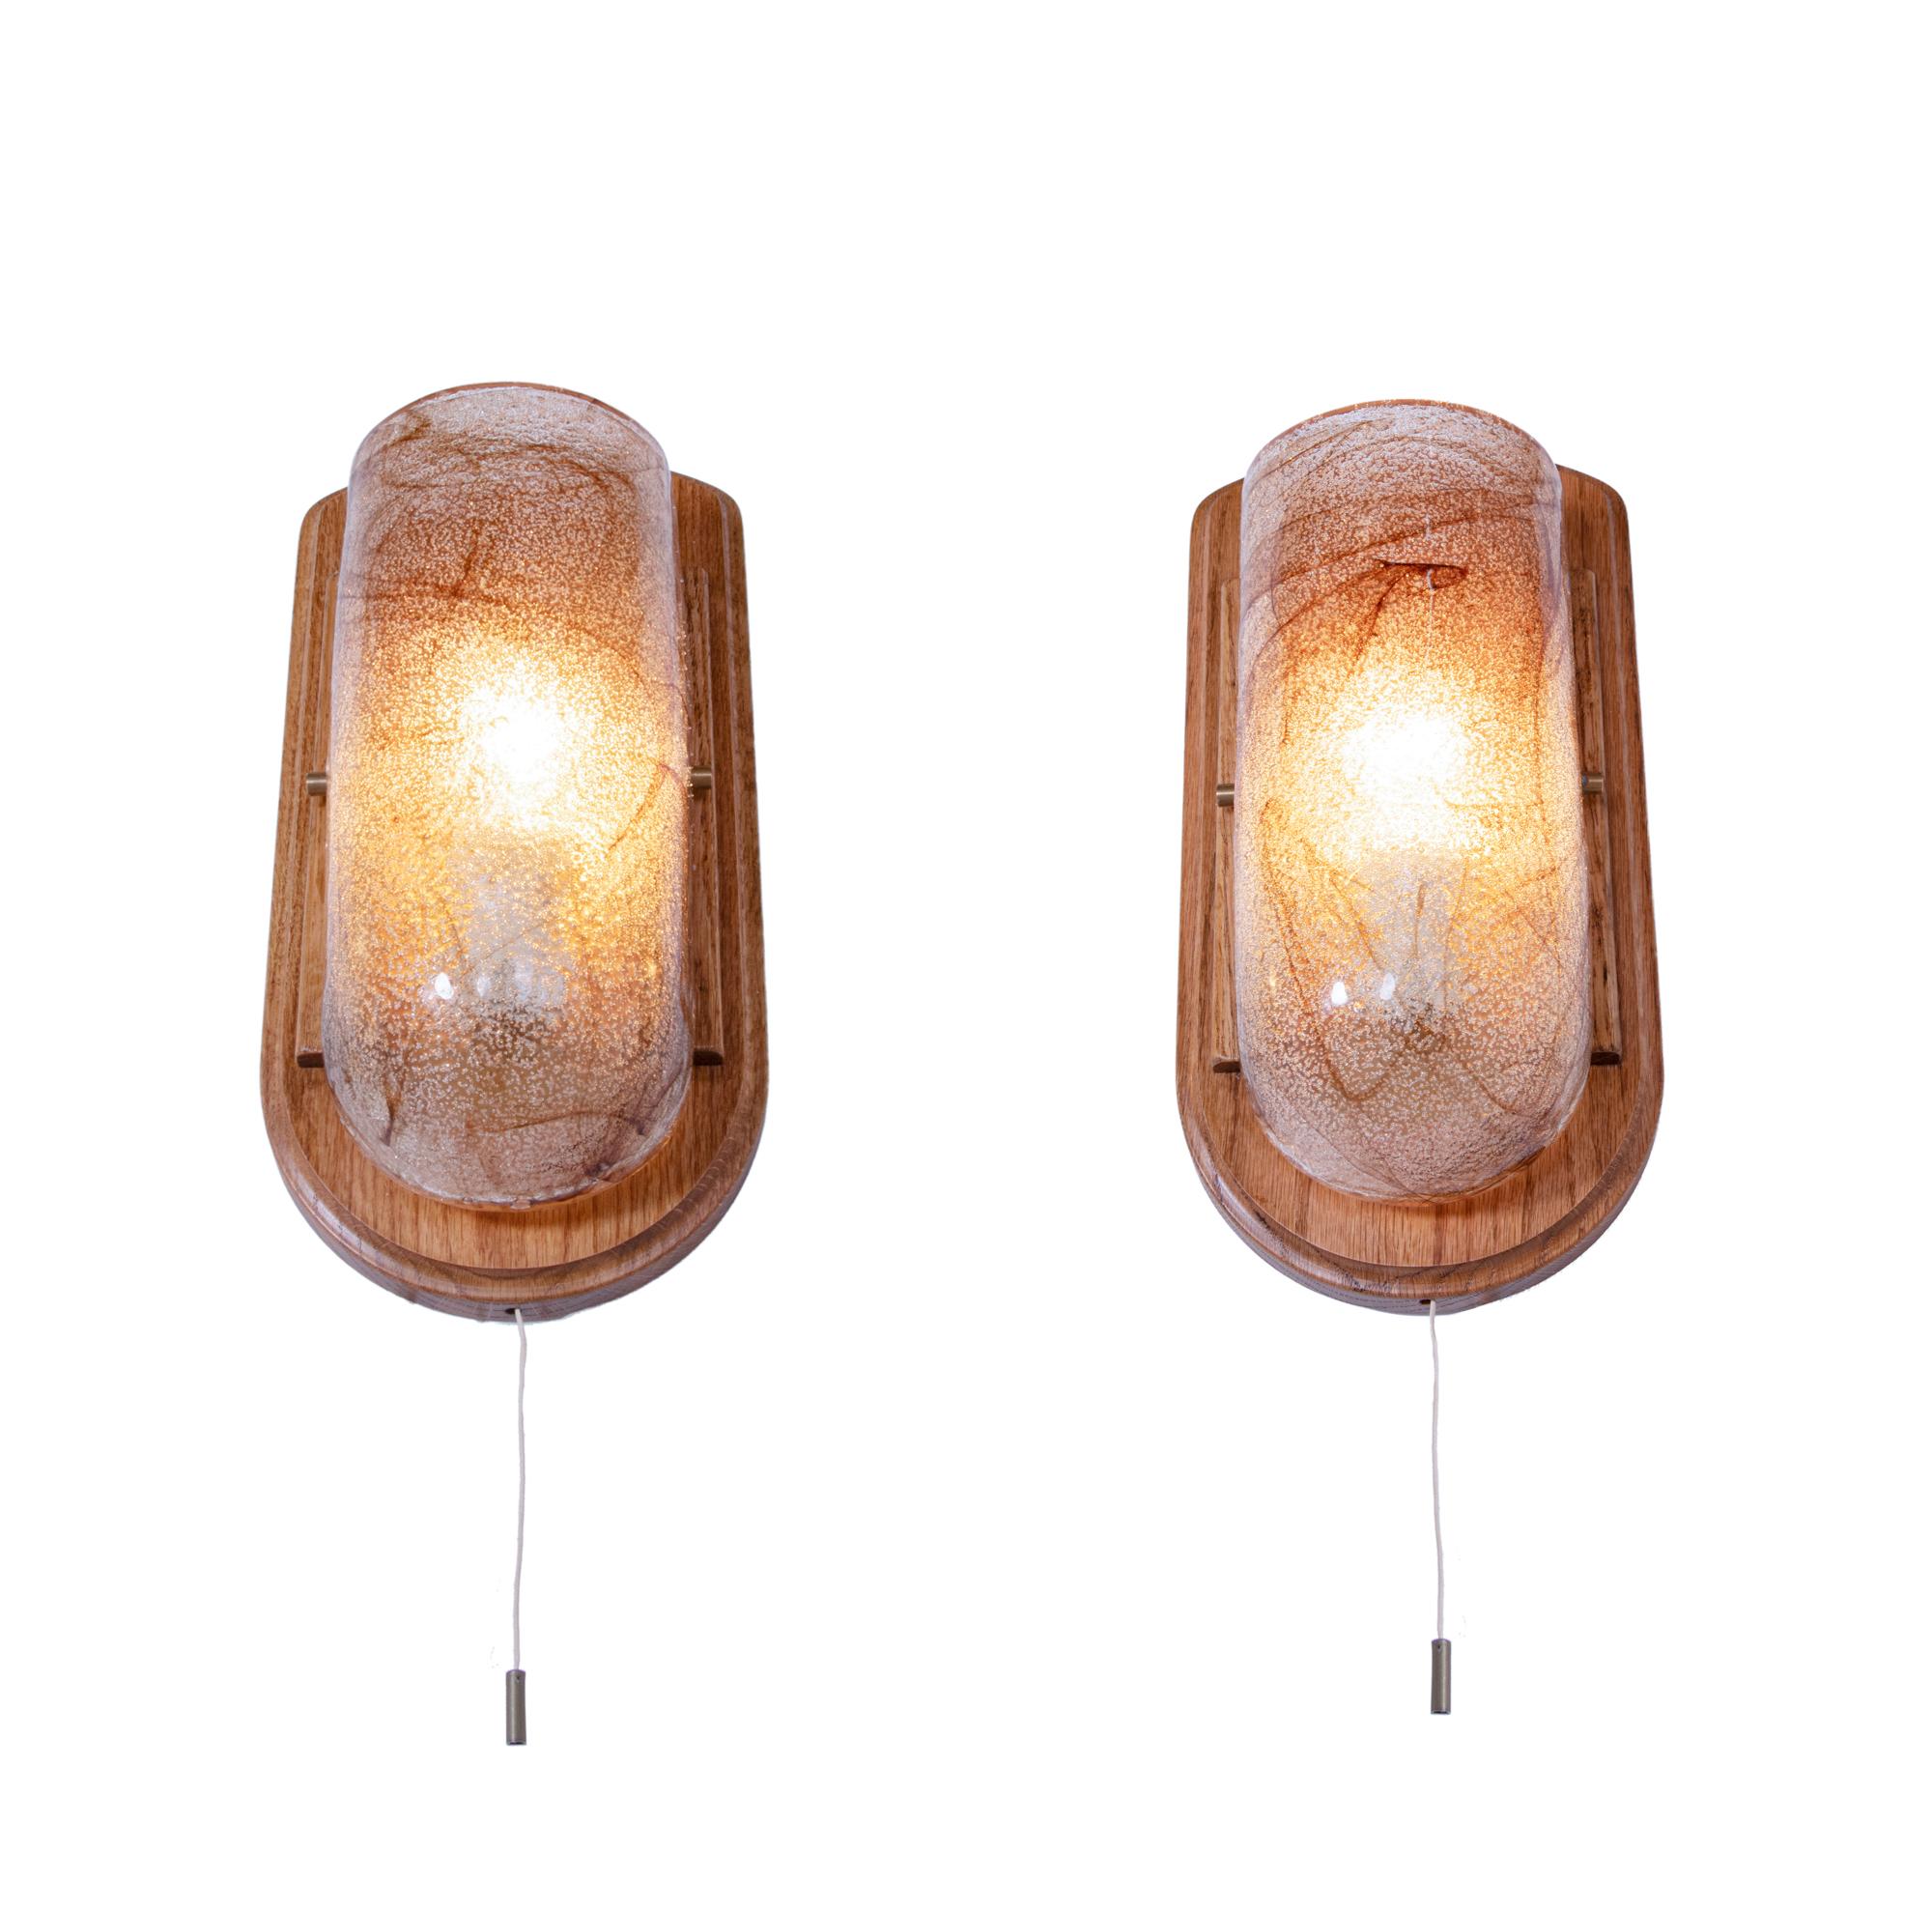 Hand-Crafted 1 'of 2' Pair of Modernist Wall Sconces Amber Murano Glass, Germany 1960s For Sale